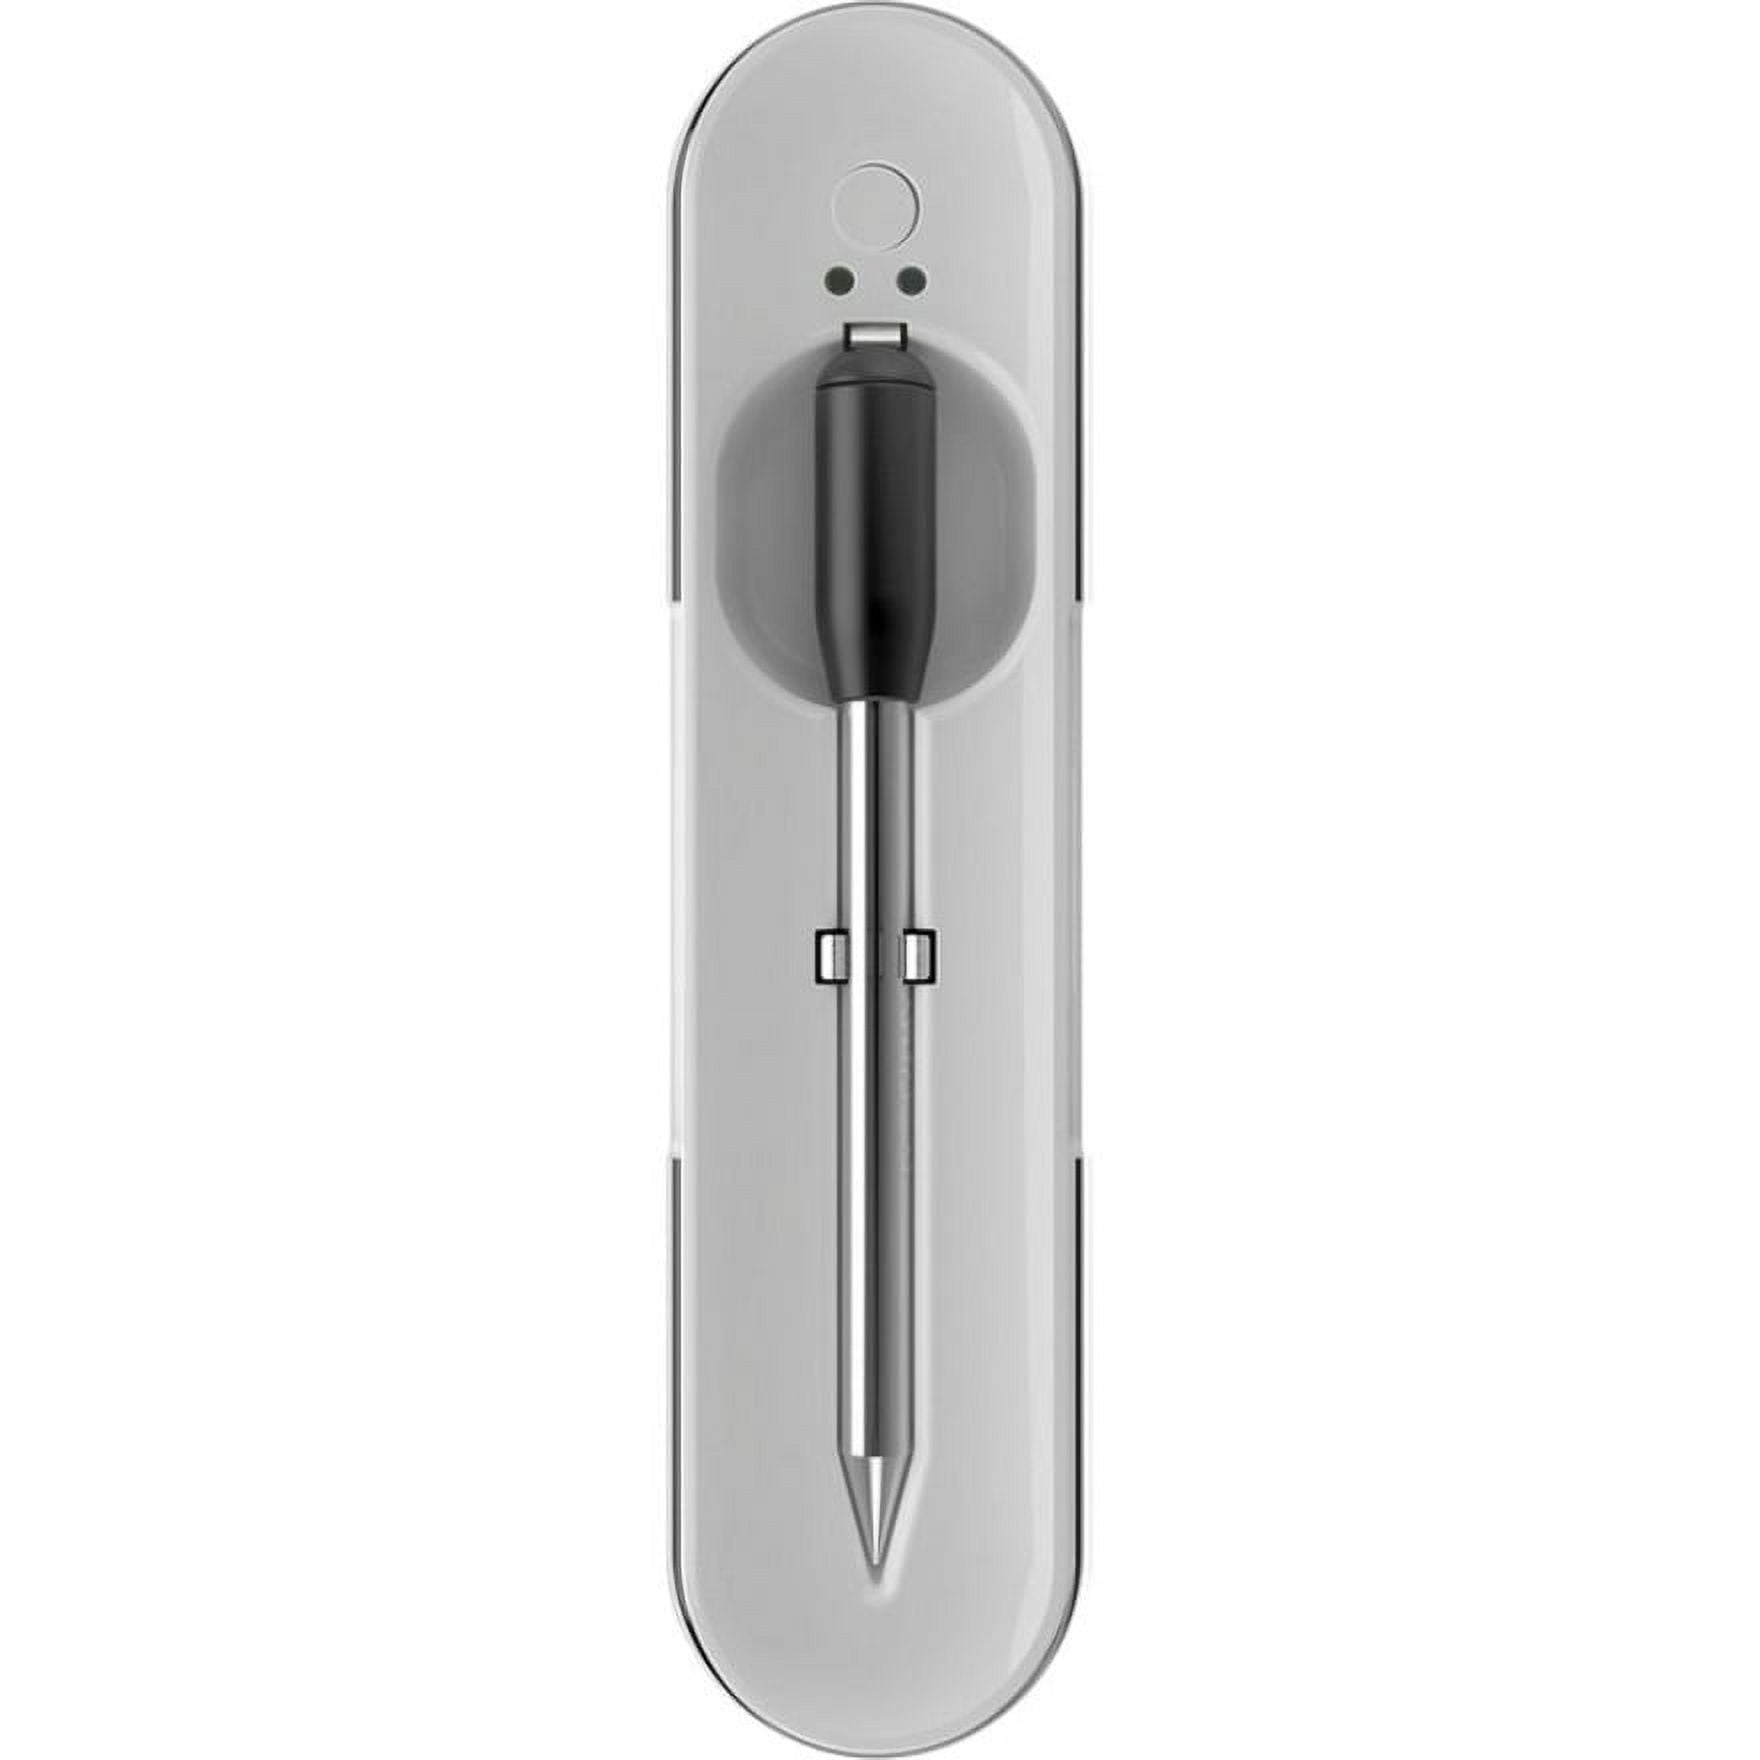 KitchenAid Yummly Smart Meat Thermometer with Wireless